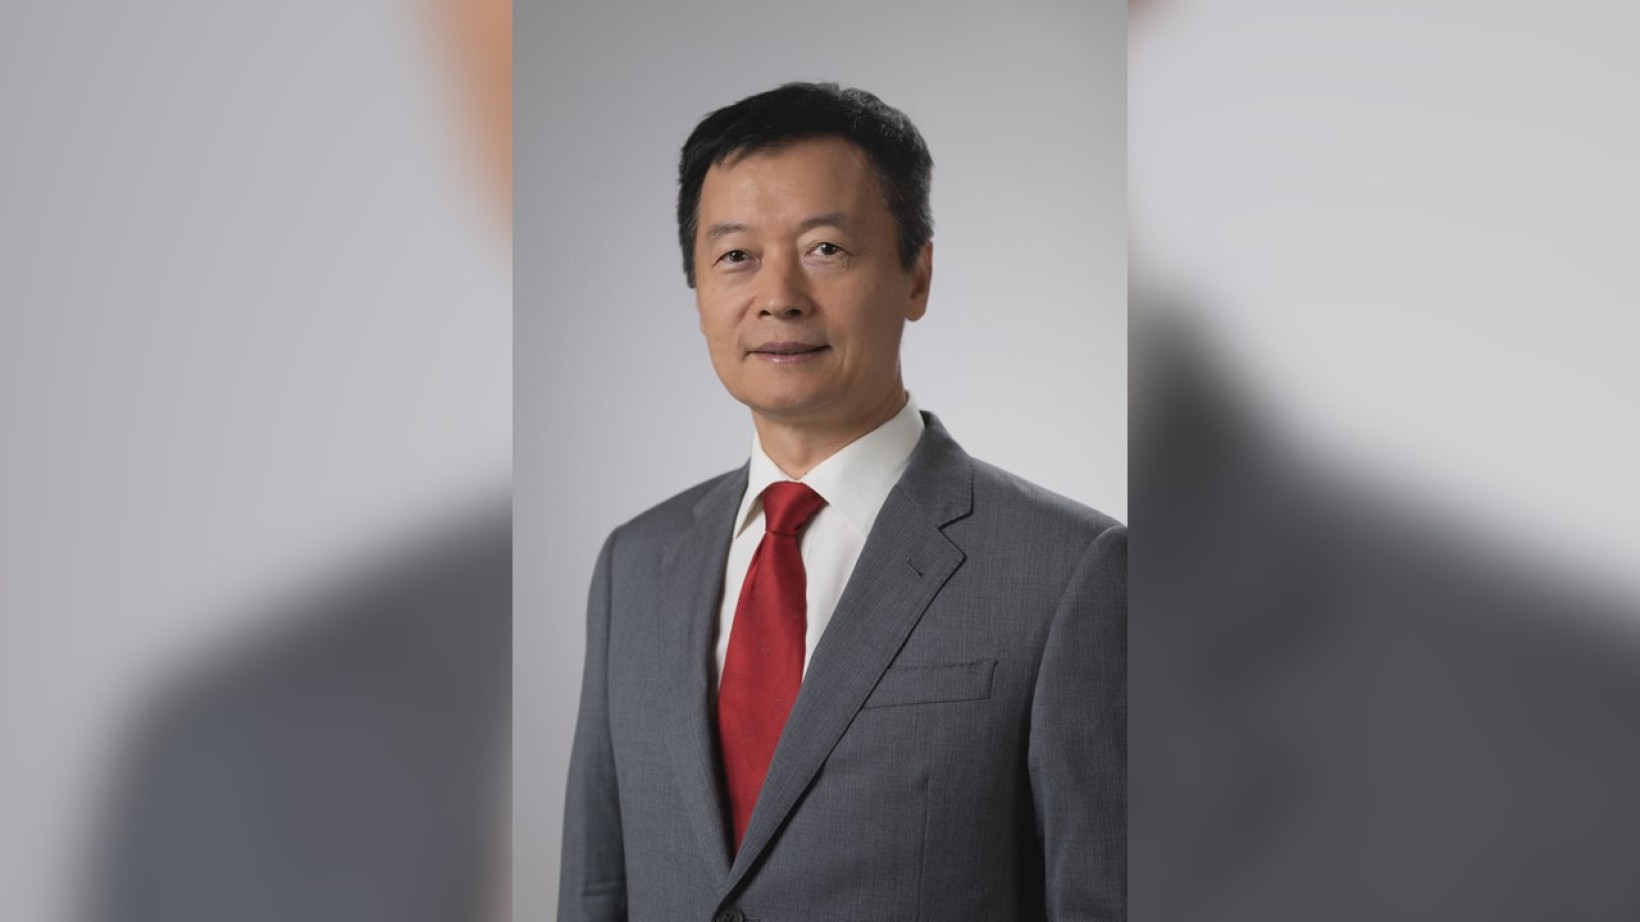 Lingnan University President S. Joe Qin elected a Member of the European Academy of Sciences and Arts.